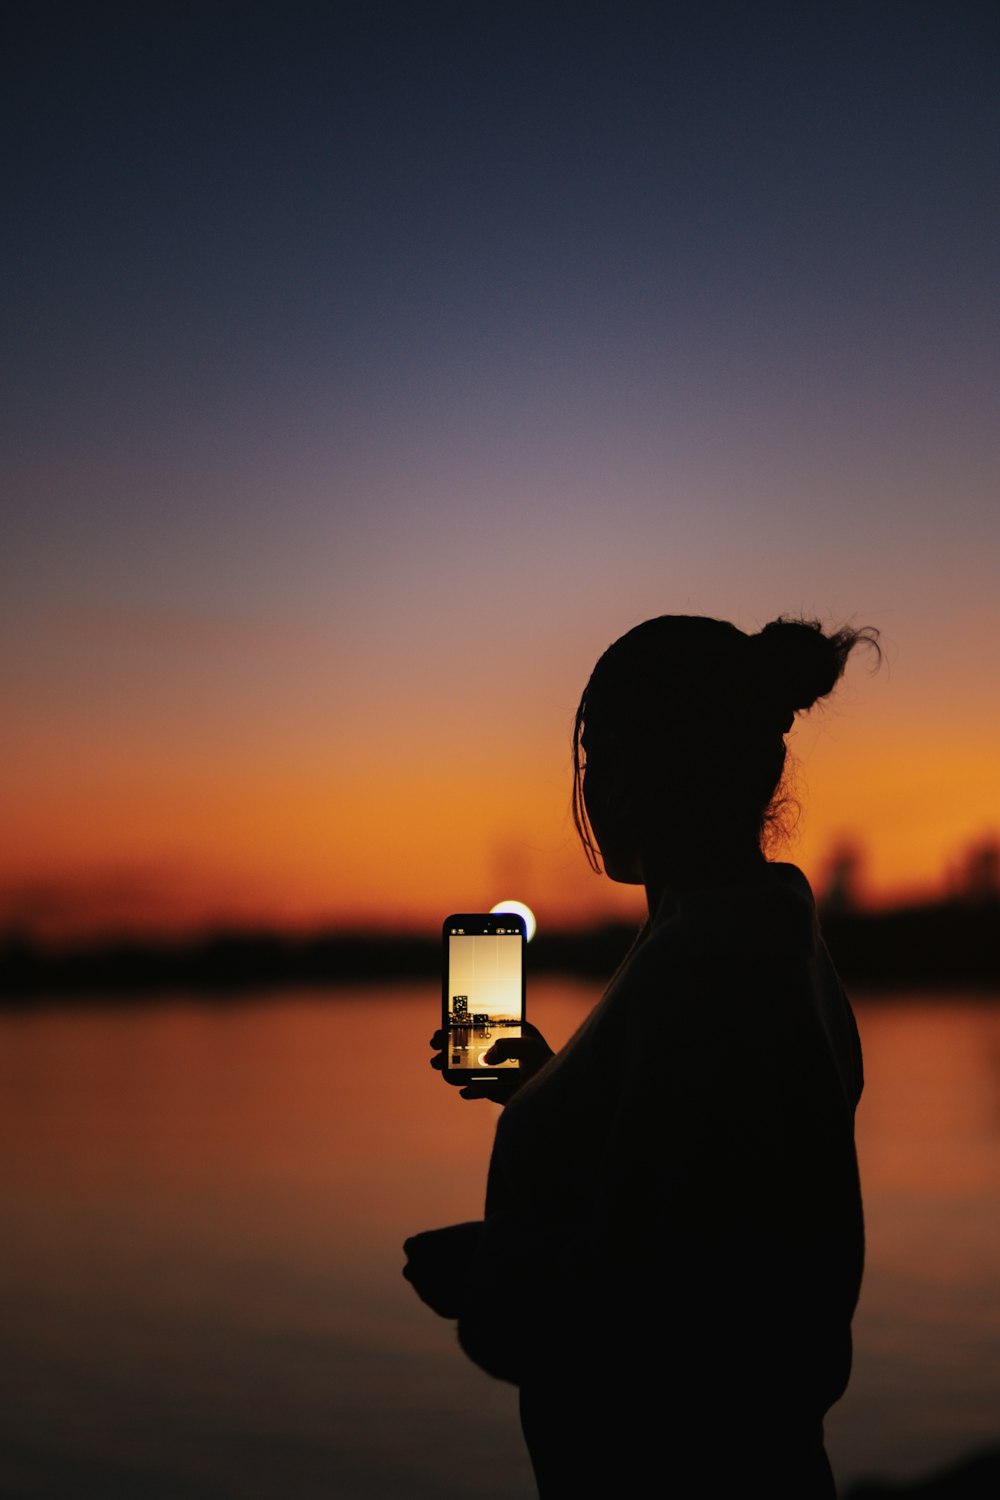 a person holding a cell phone in front of a body of water